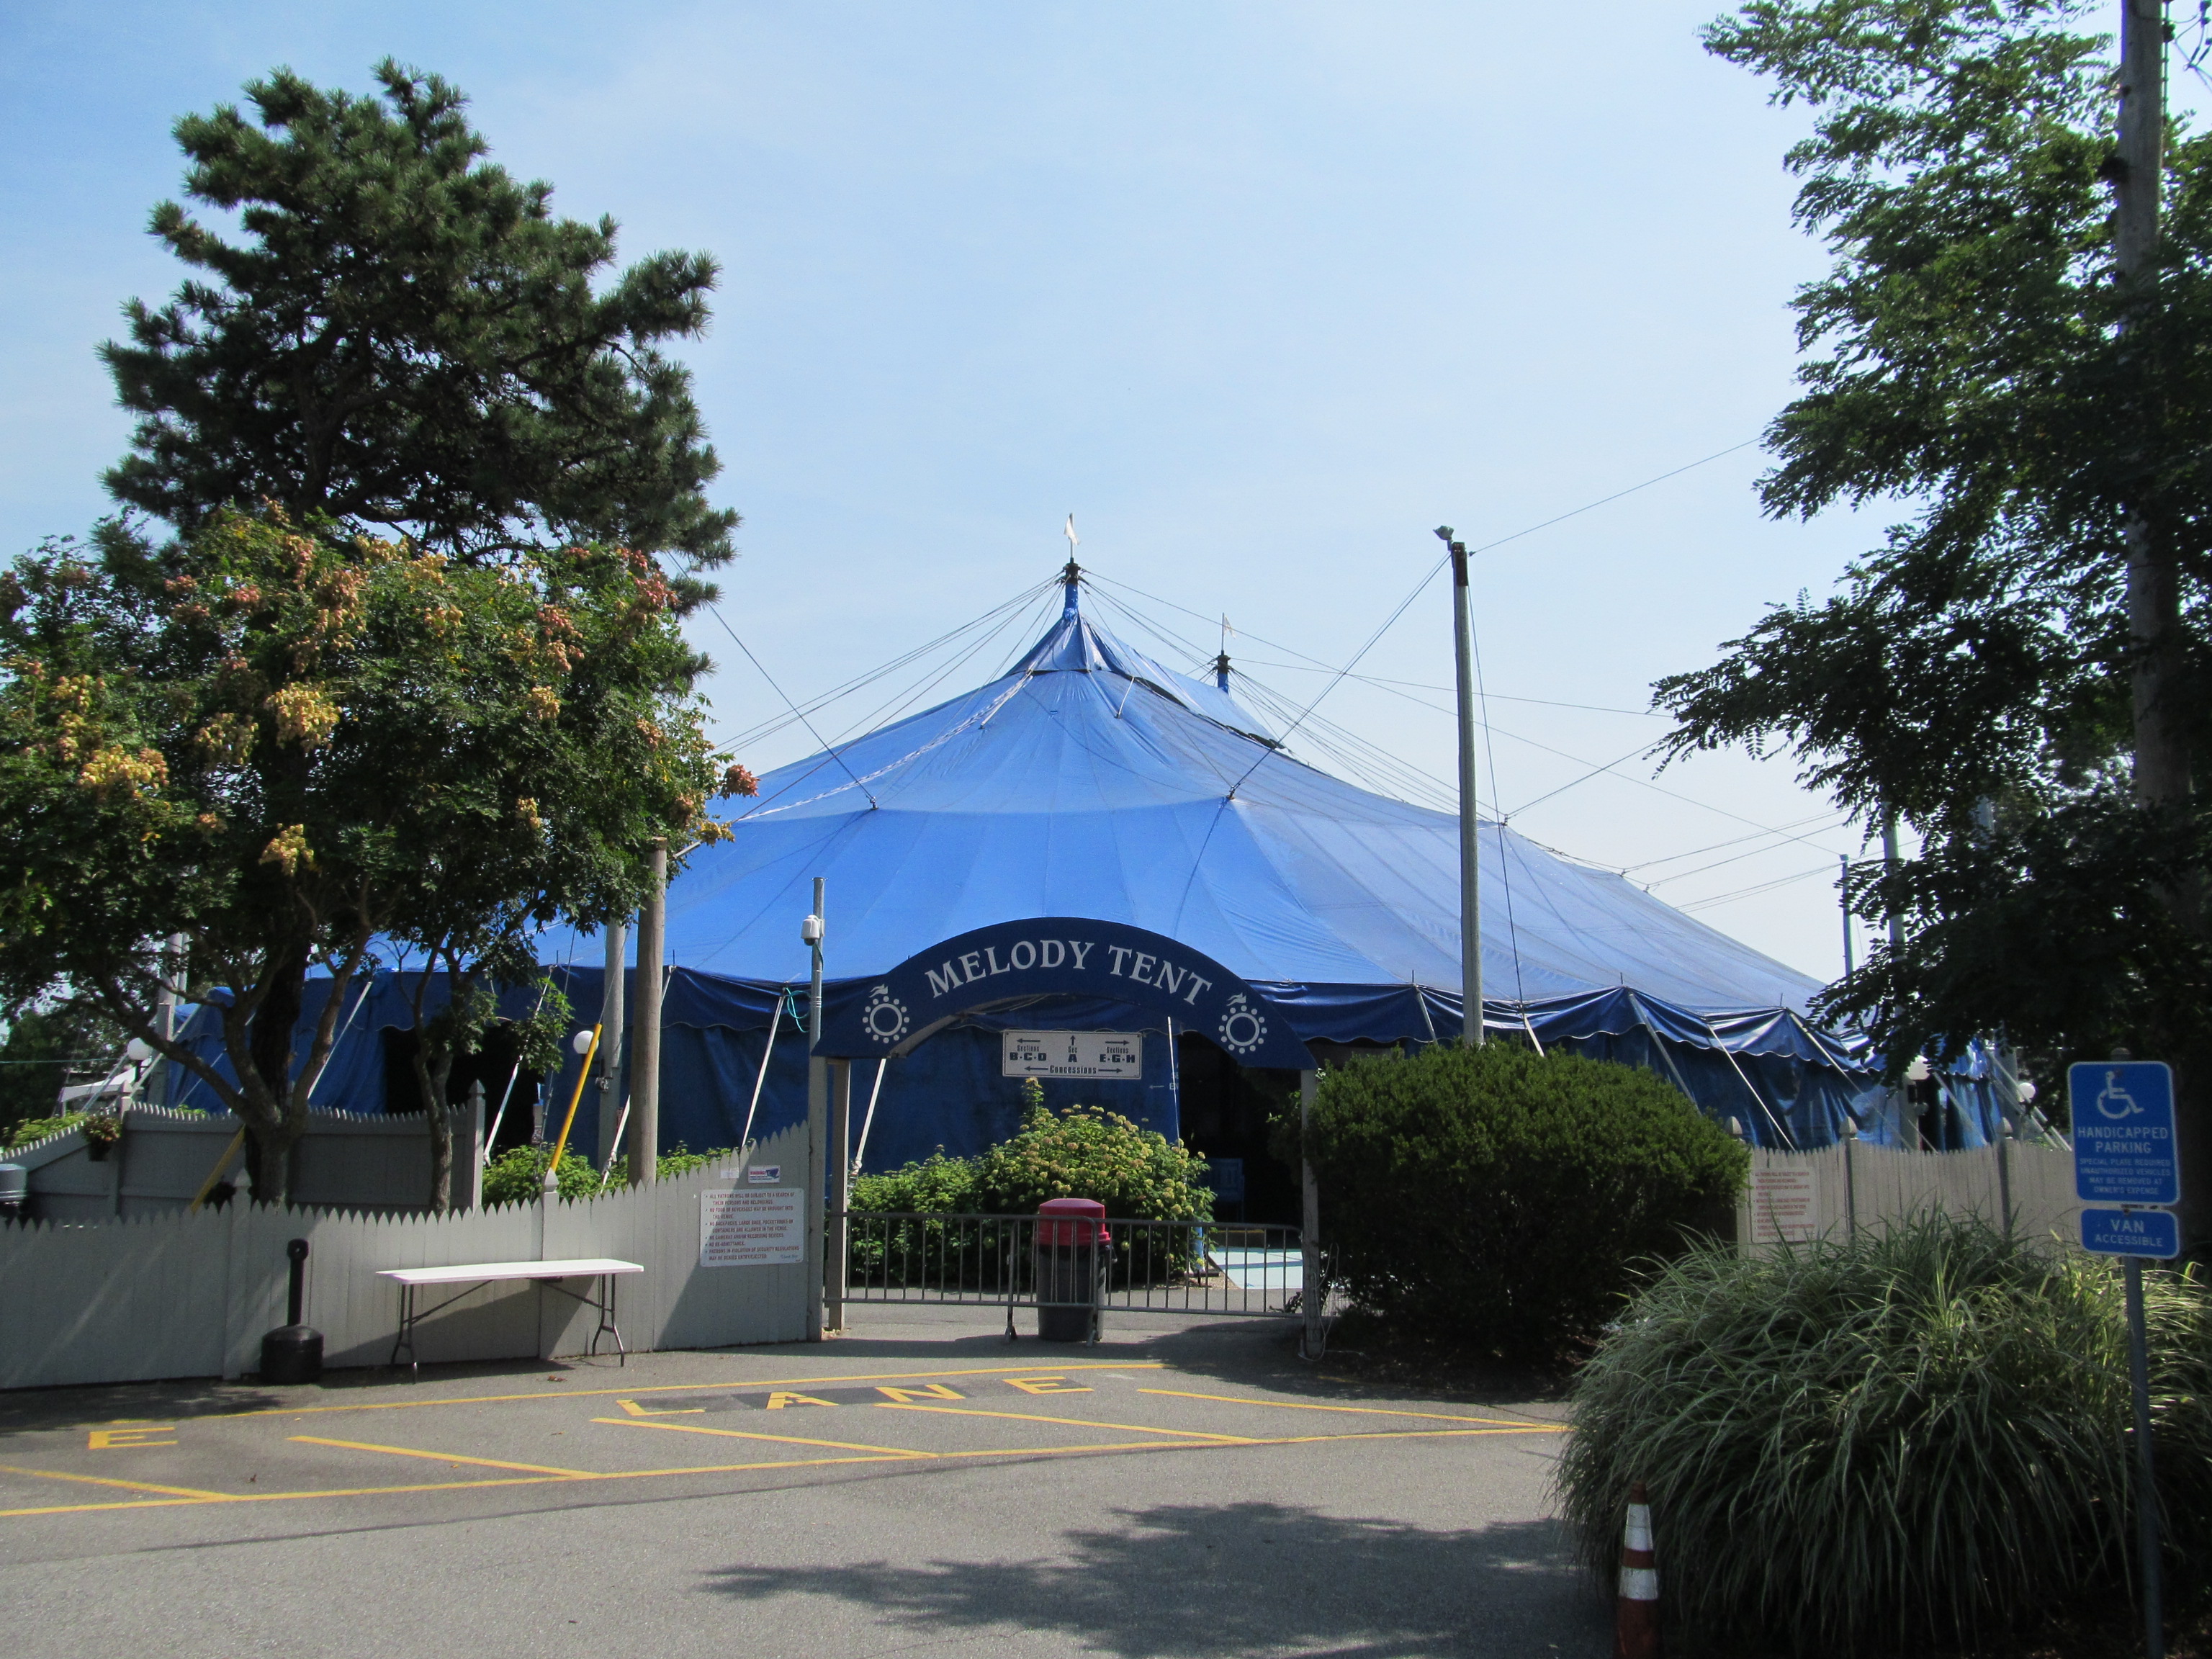 Cape Cod Melody Tent Hyannis Tickets, Schedule, Seating Chart